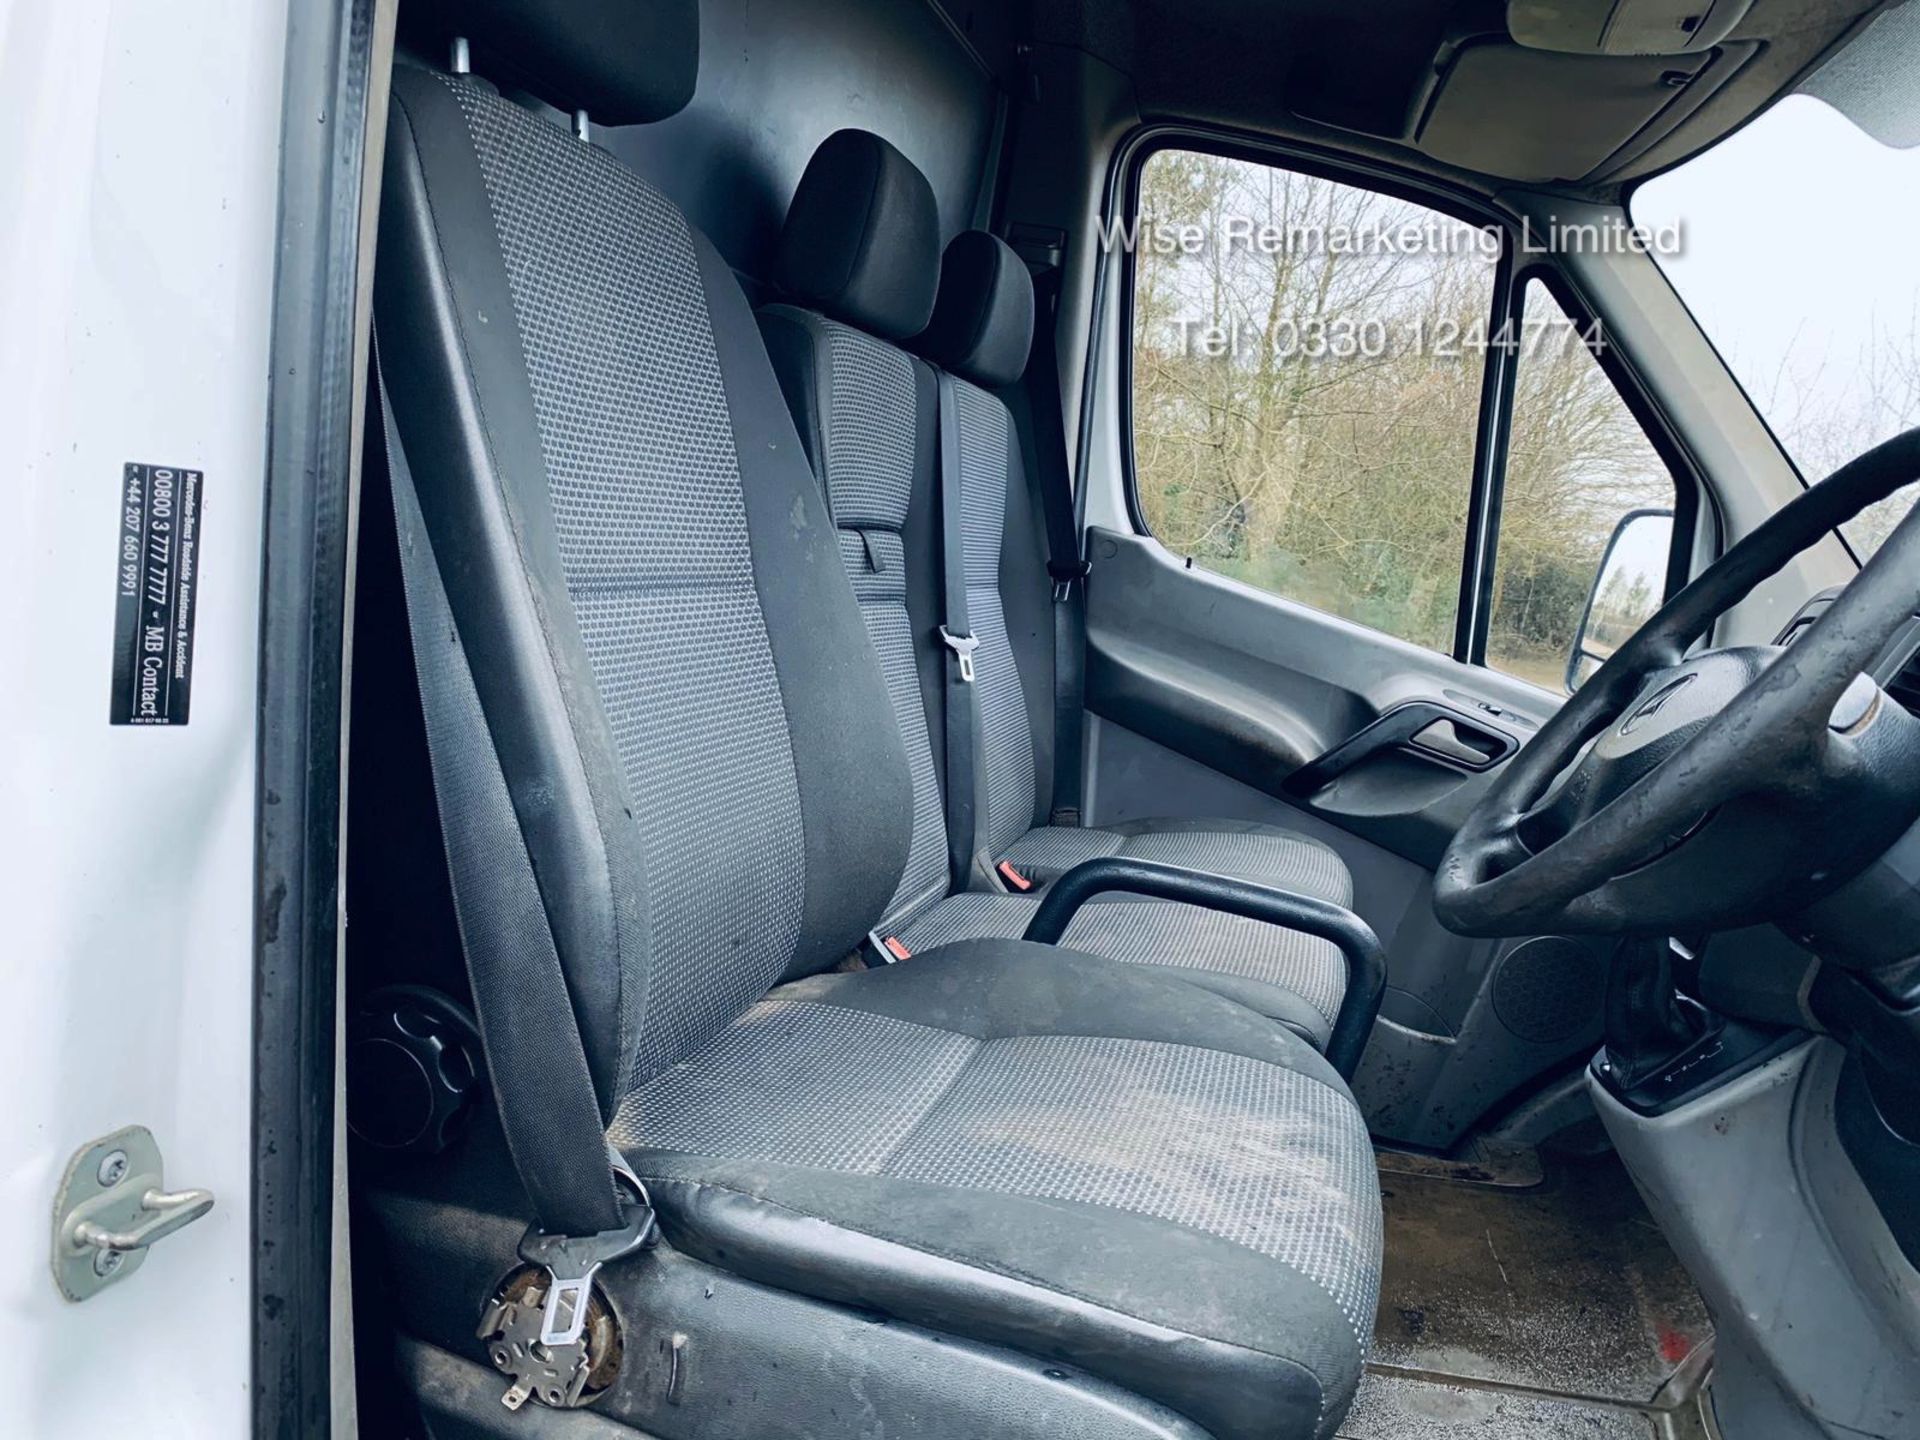 Mercedes Sprinter 313 2.1 CDI *Automatic Triptronic Gearbox* - 2011 Model - Ply Lined - Image 13 of 15